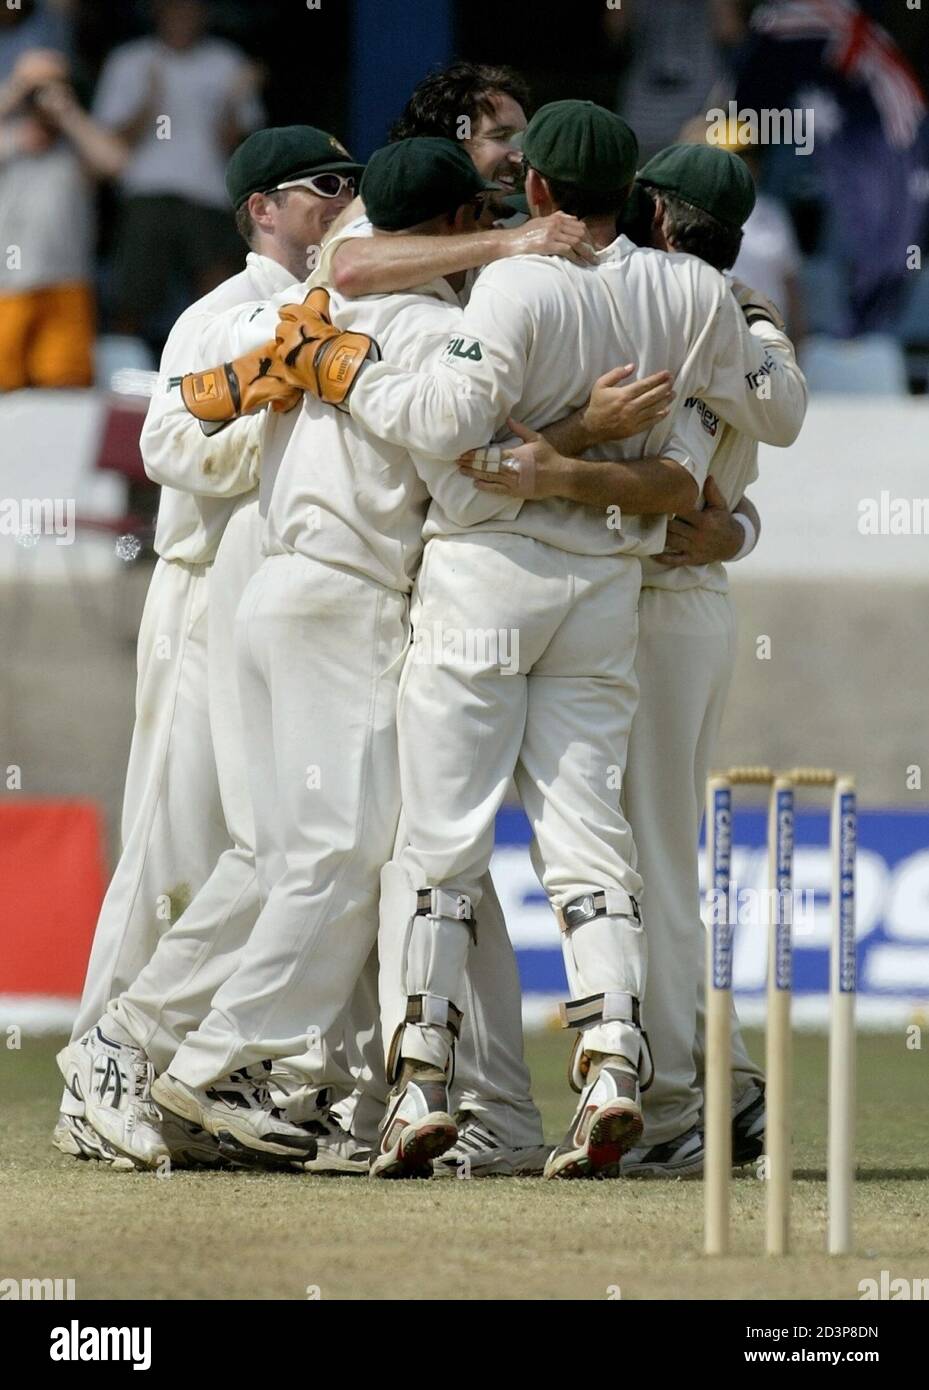 Members of the Australian cricket team clebrate taking the last wicket and winning the second test over West Indies in Port of Spain, Trinidad April 23, 2003. Australia defeated West Indies by 118 runs. REUTERS/Andy Clark REUTERS  AC Stock Photo